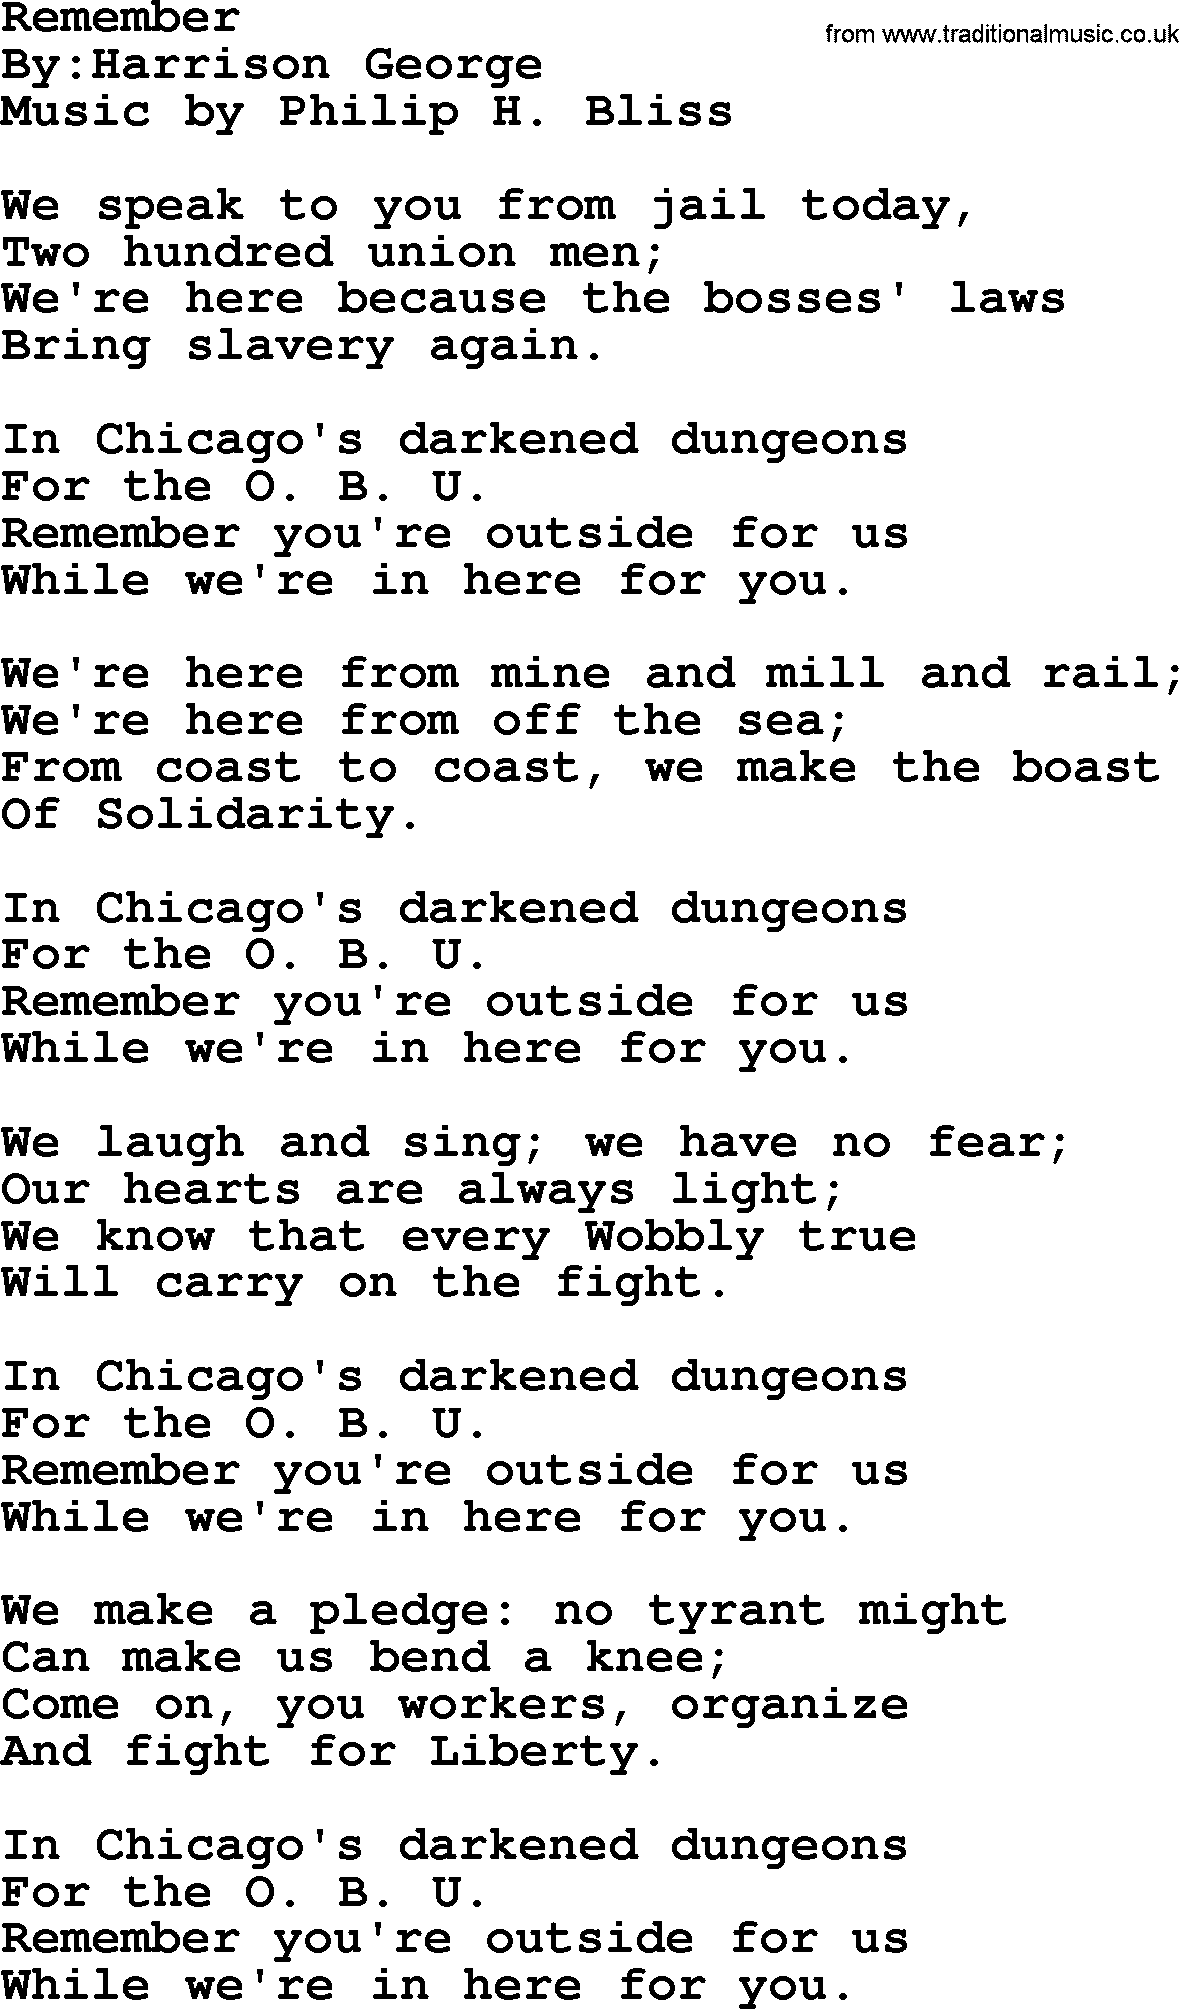 Political, Solidarity, Workers or Union song: Remember, lyrics